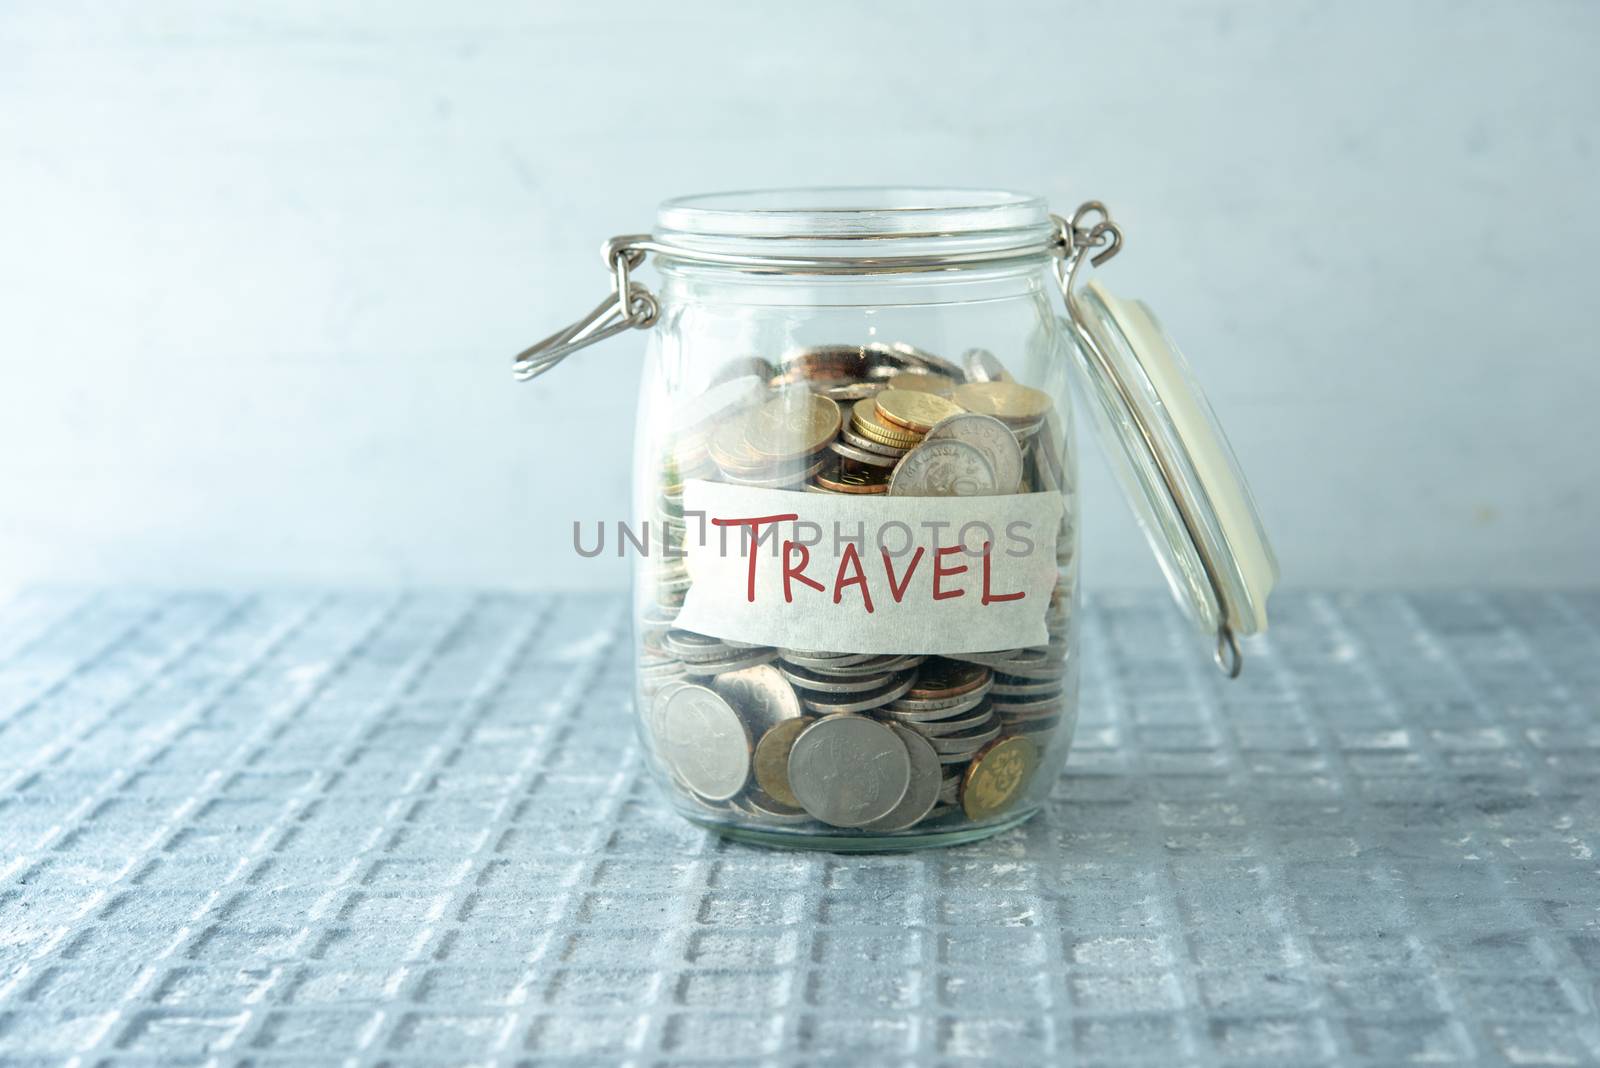 Coins in glass money jar with travel label, financial concept.